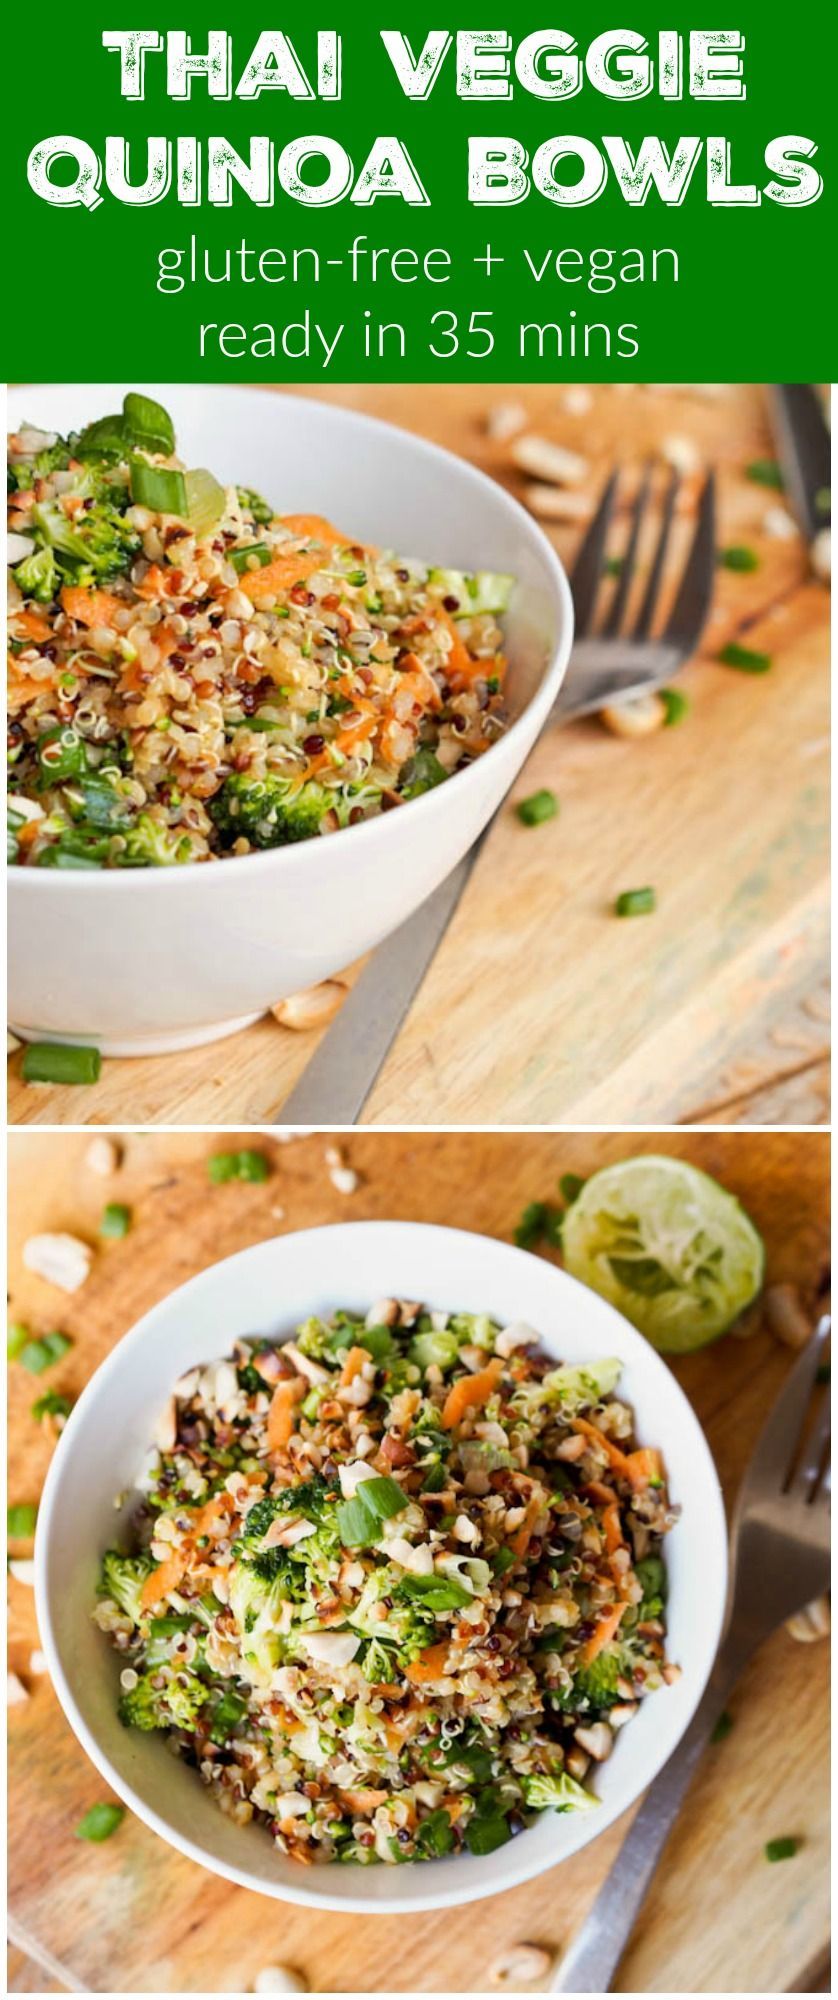 This Thai Veggie Quinoa Bowl recipe is a perfect healthy one pot meal. Full of cru